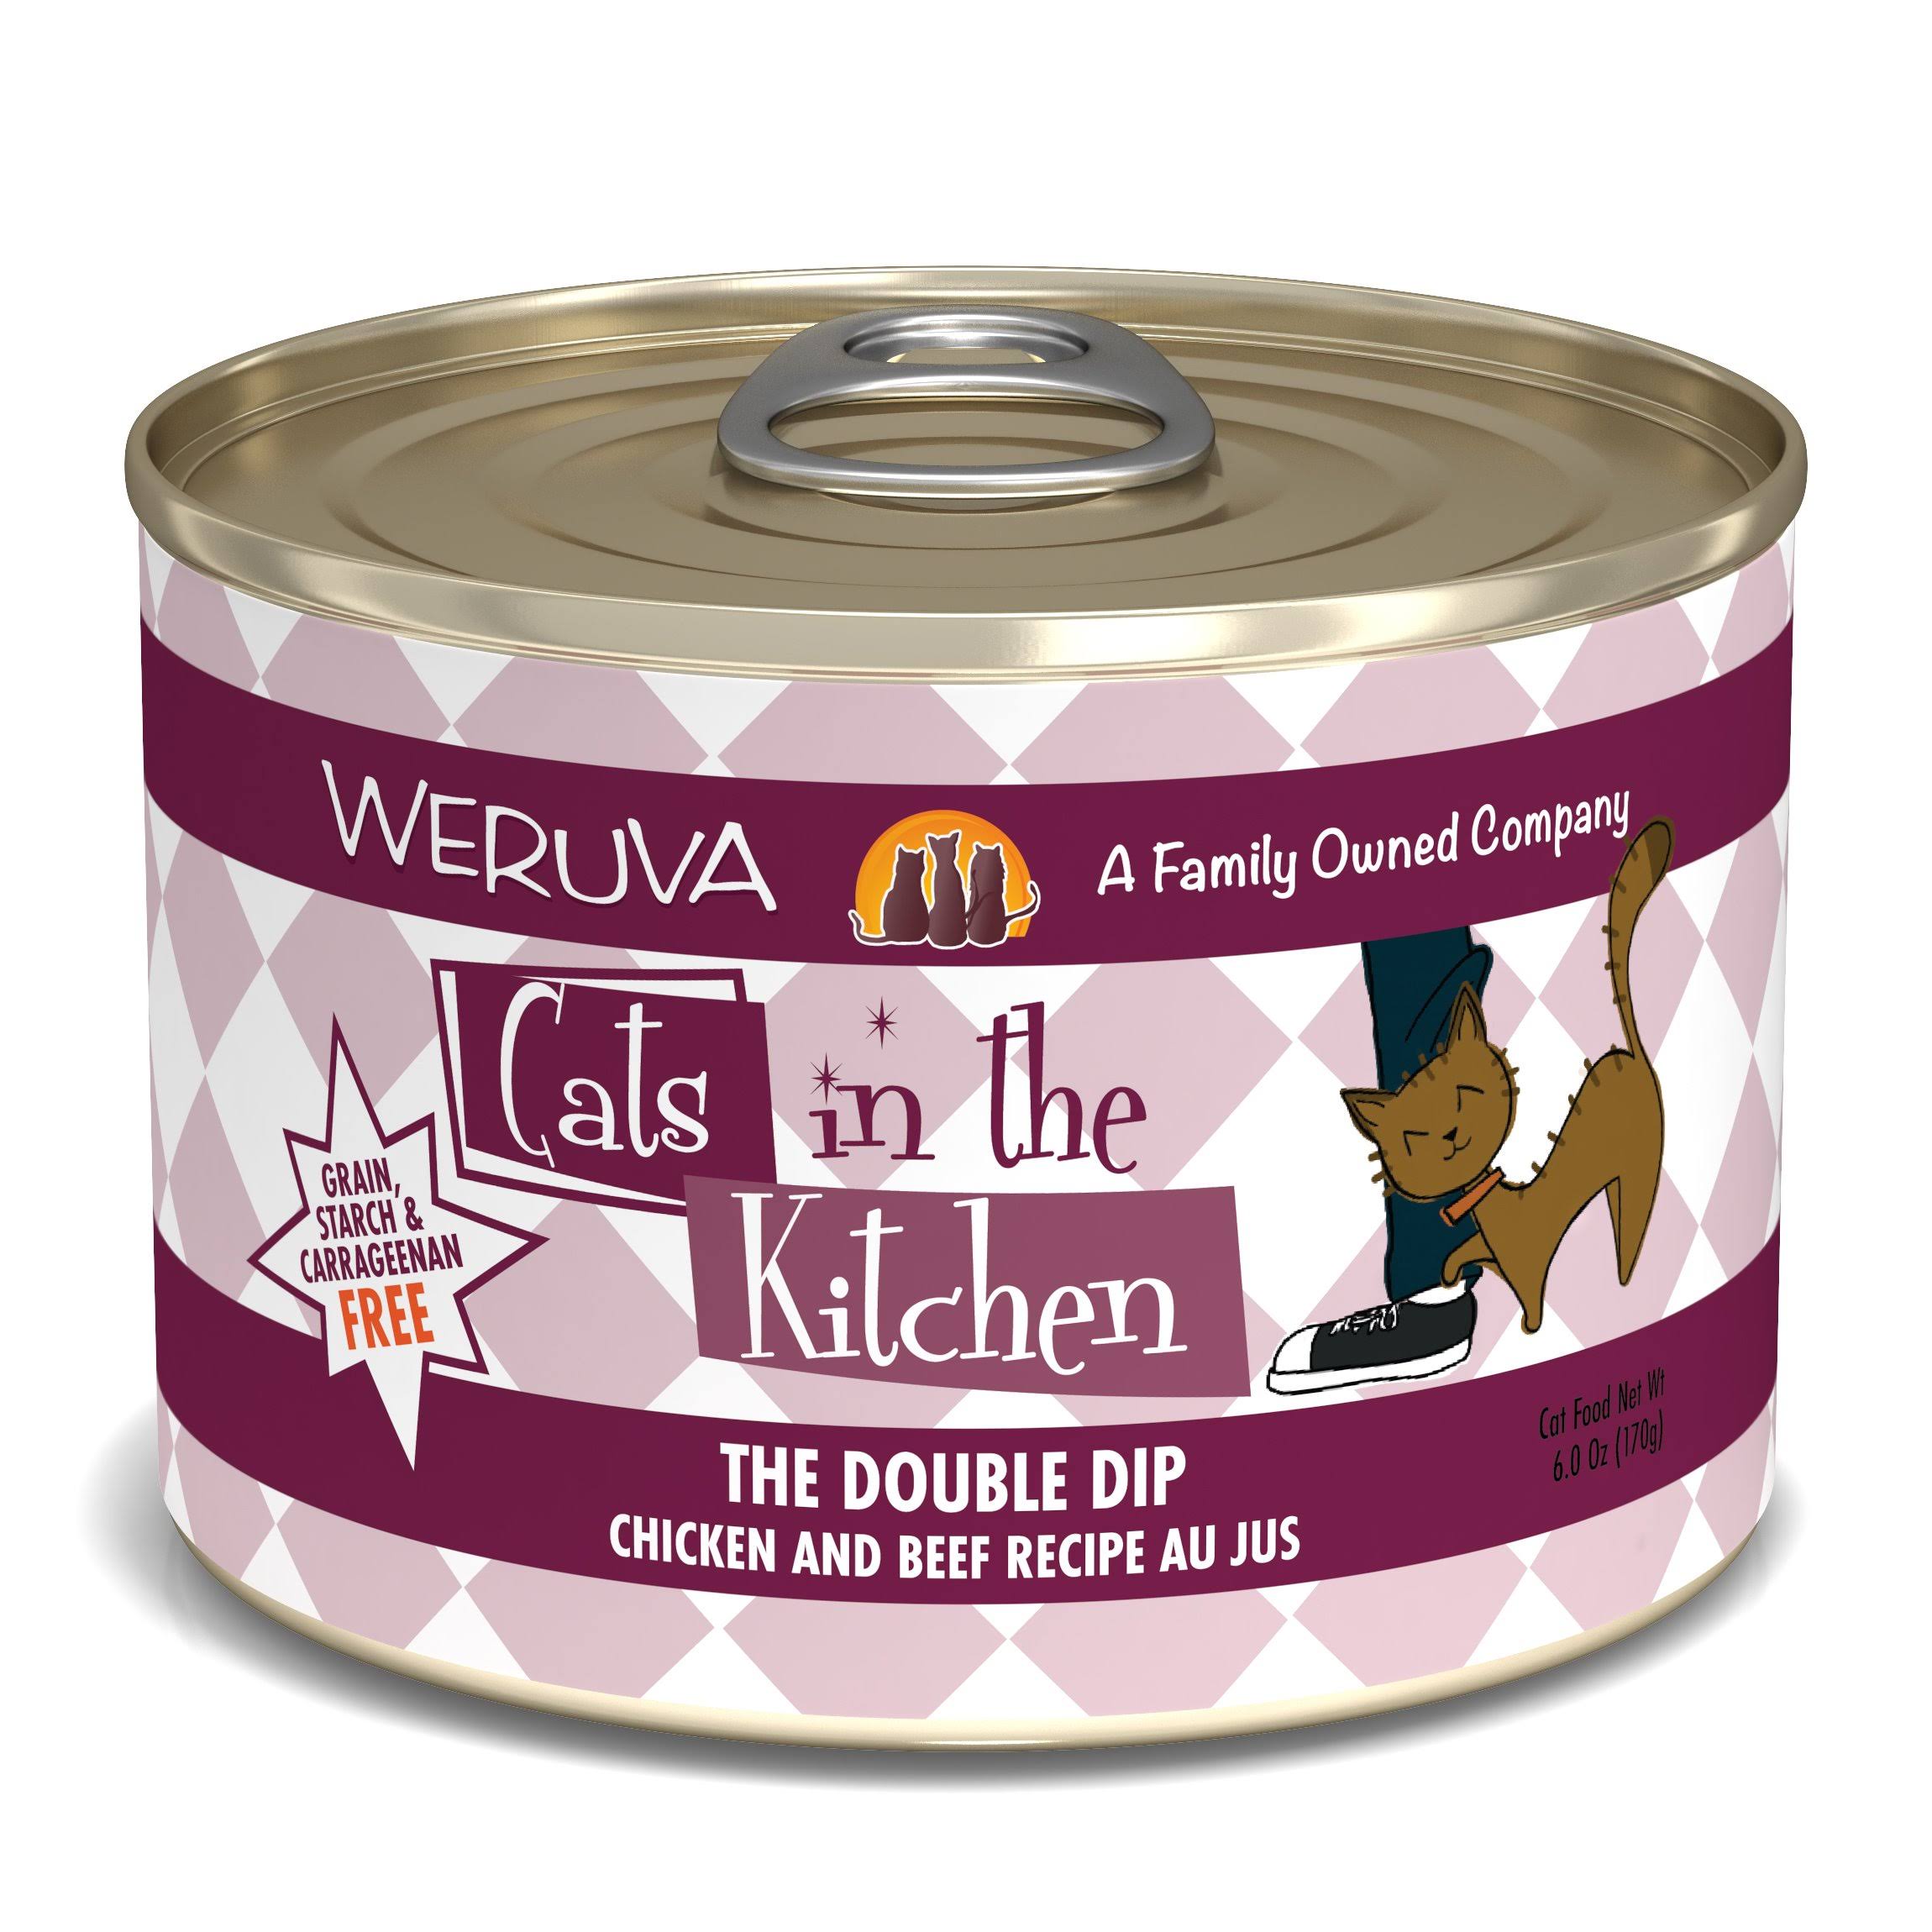 Weruva The Double Dip Cat Food - Chicken and Beef Au Jus, 6oz, 24pk